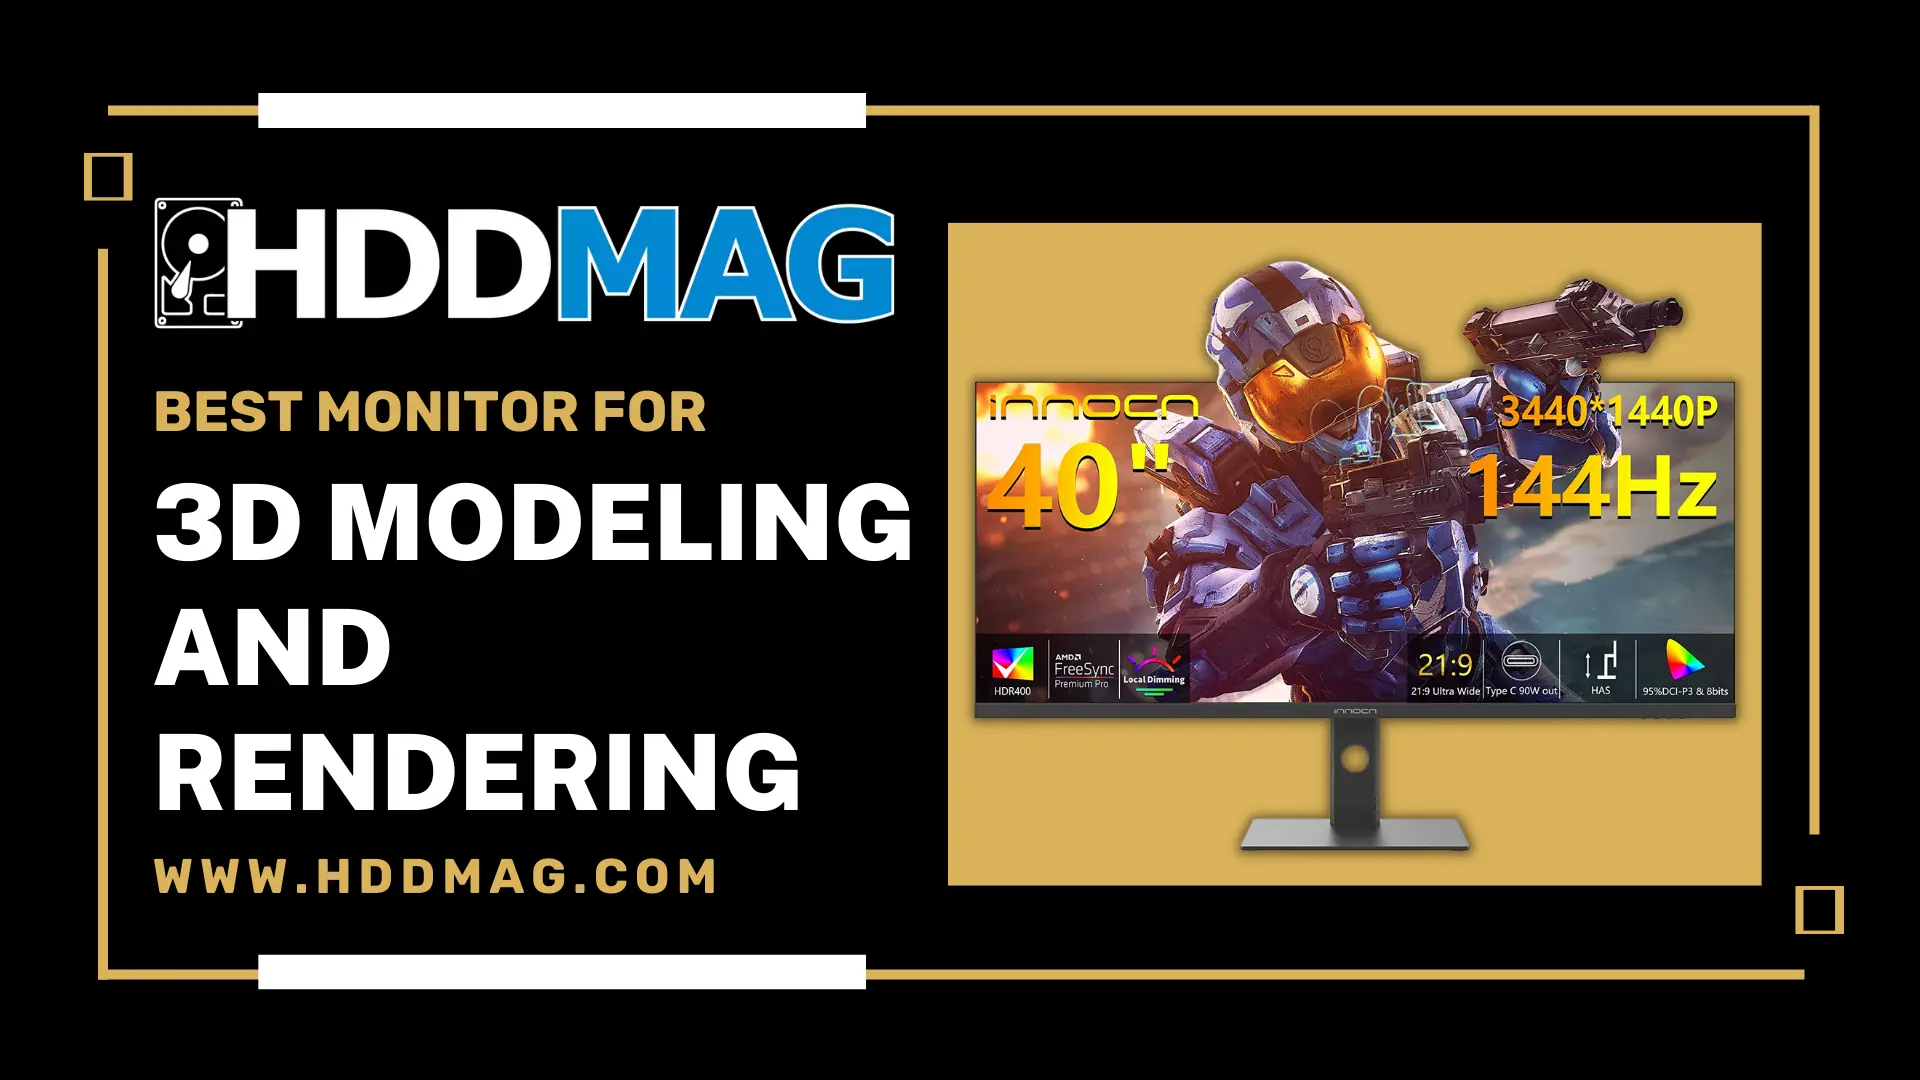 Best Monitor for 3D Modeling and Rendering